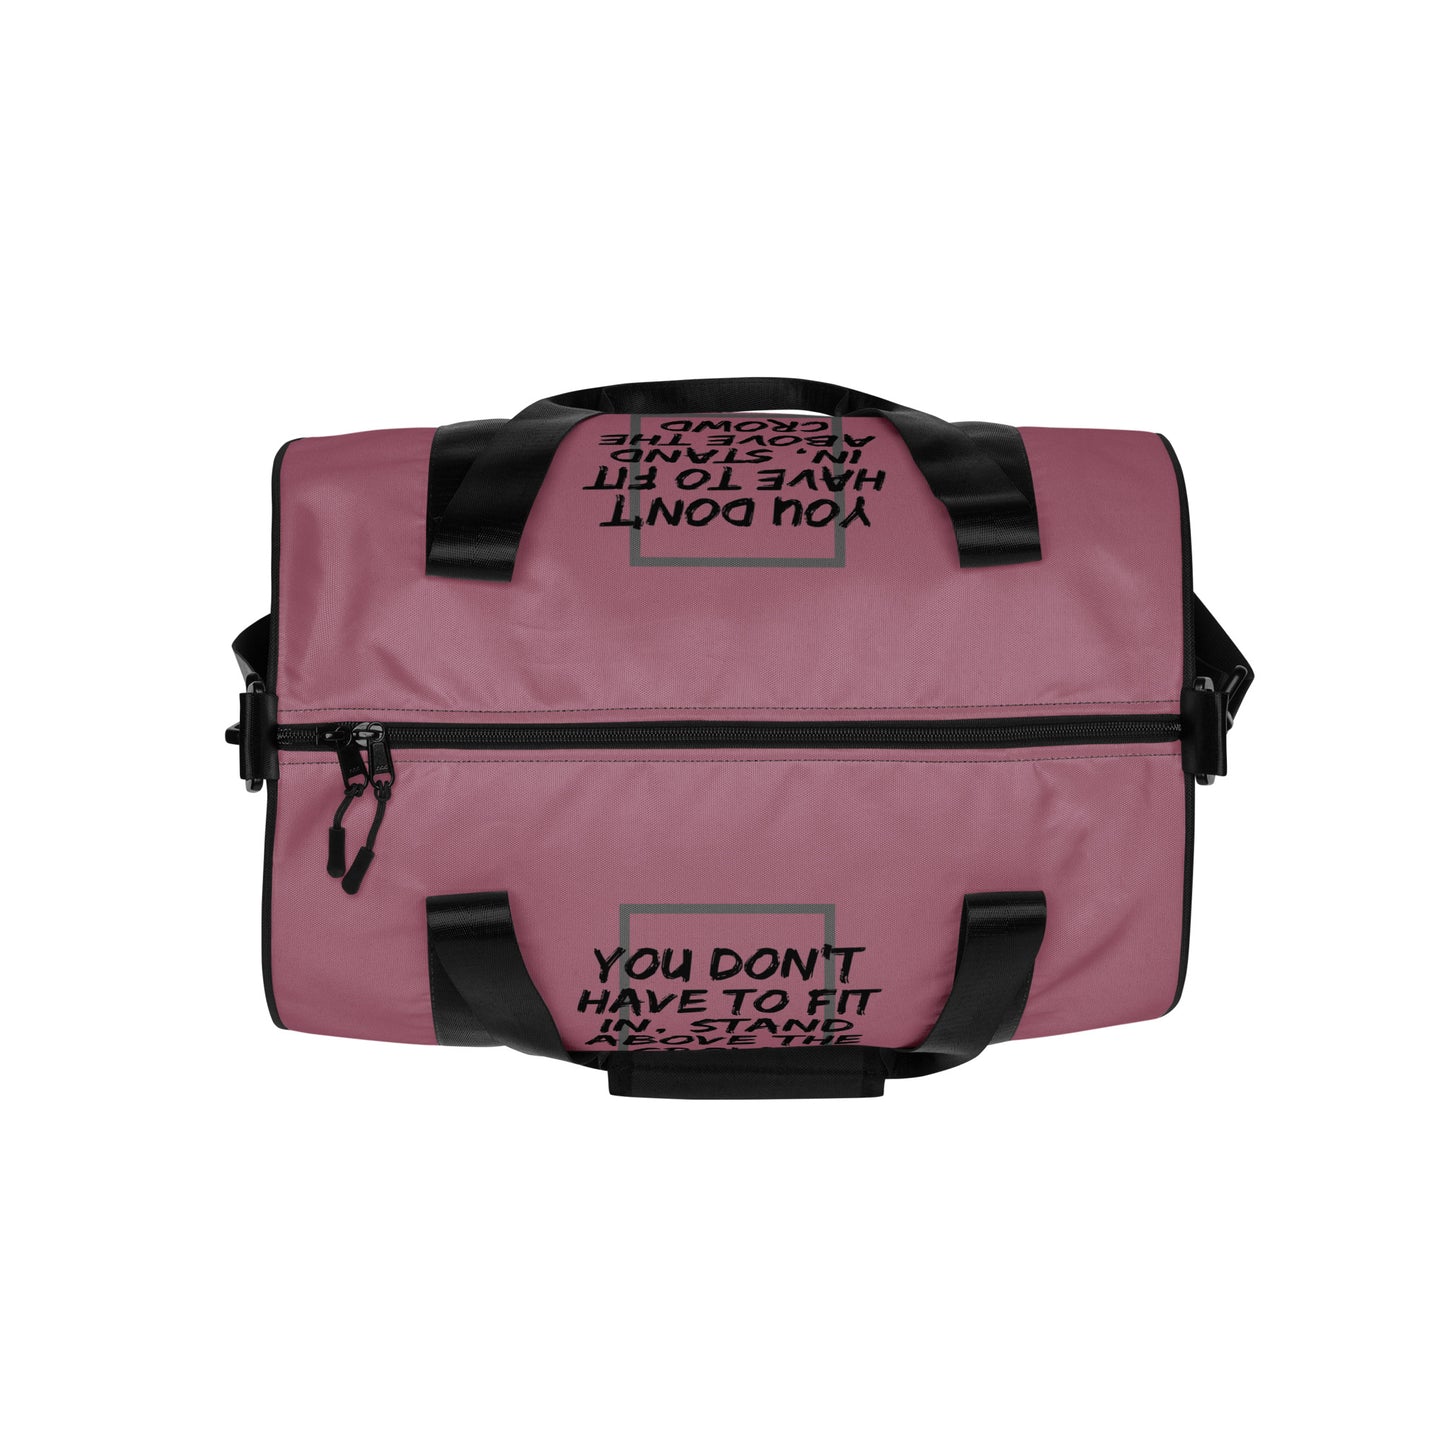 Dusty Rose 'Fit In' gym bag